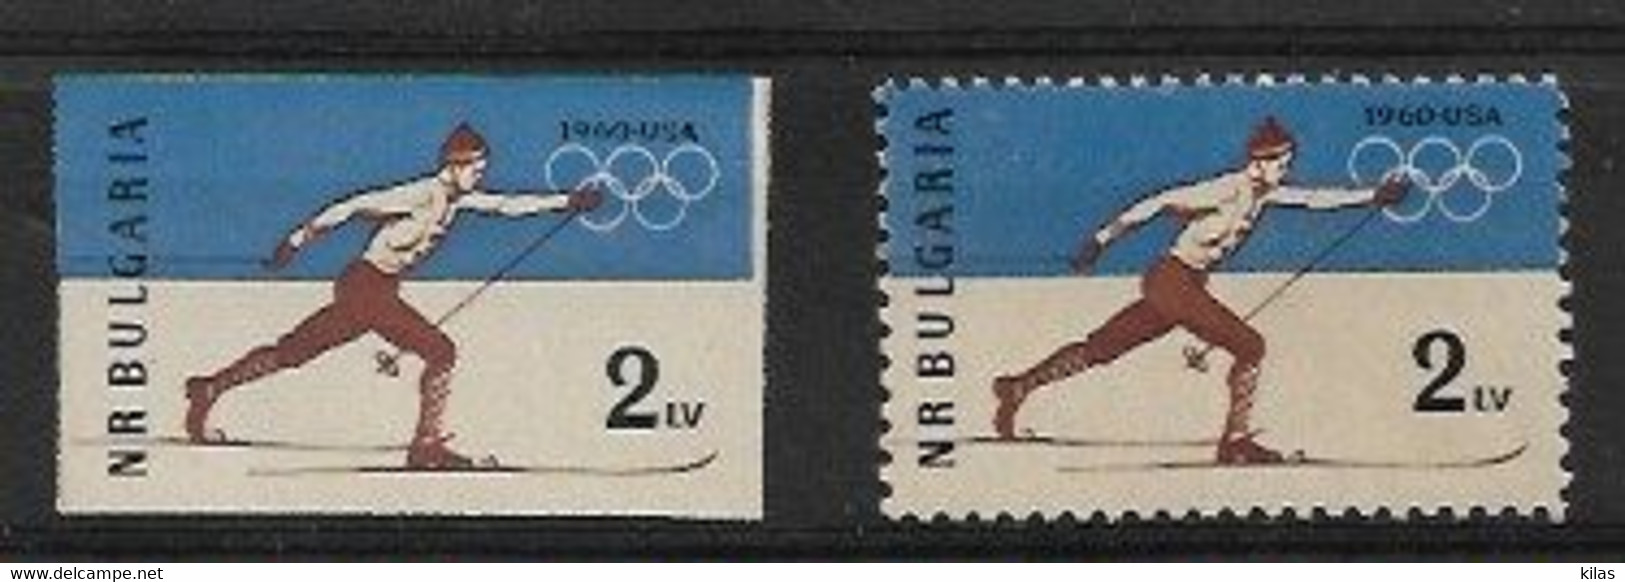 BULGARIA 1960 OLYMPIC GAMES SQUAW VALLEY - Inverno1960: Squaw Valley